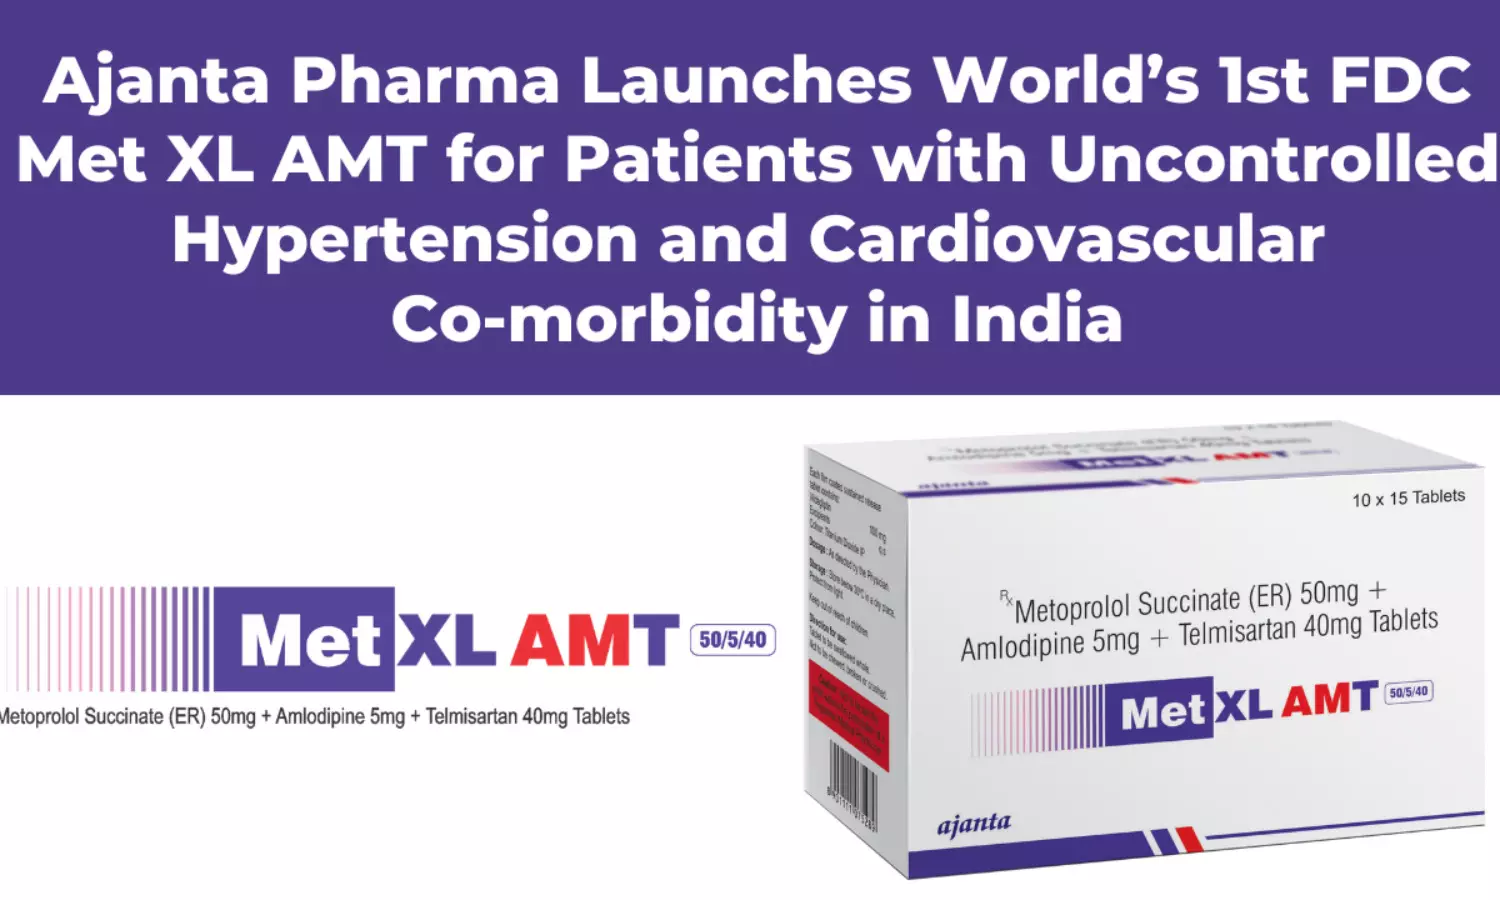 Ajanta Pharma Launches Worlds 1st FDC Met XL AMT for Patients with Uncontrolled Hypertension and Cardiovascular Co-morbidity in India